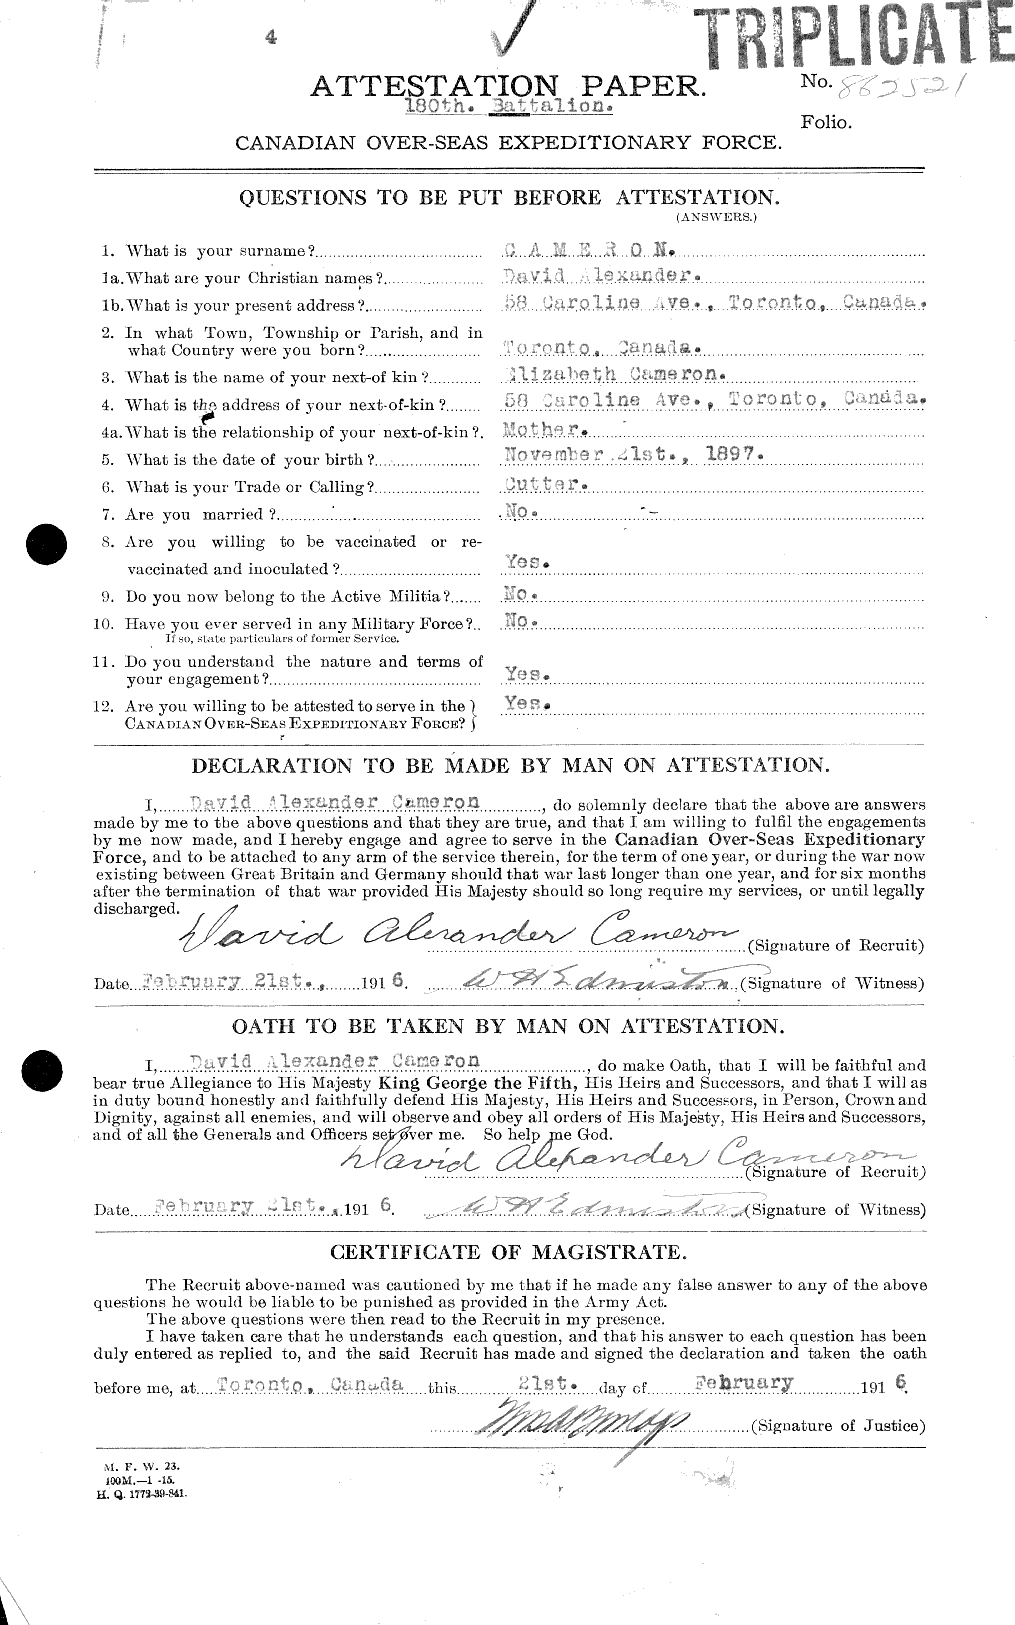 Personnel Records of the First World War - CEF 006485a